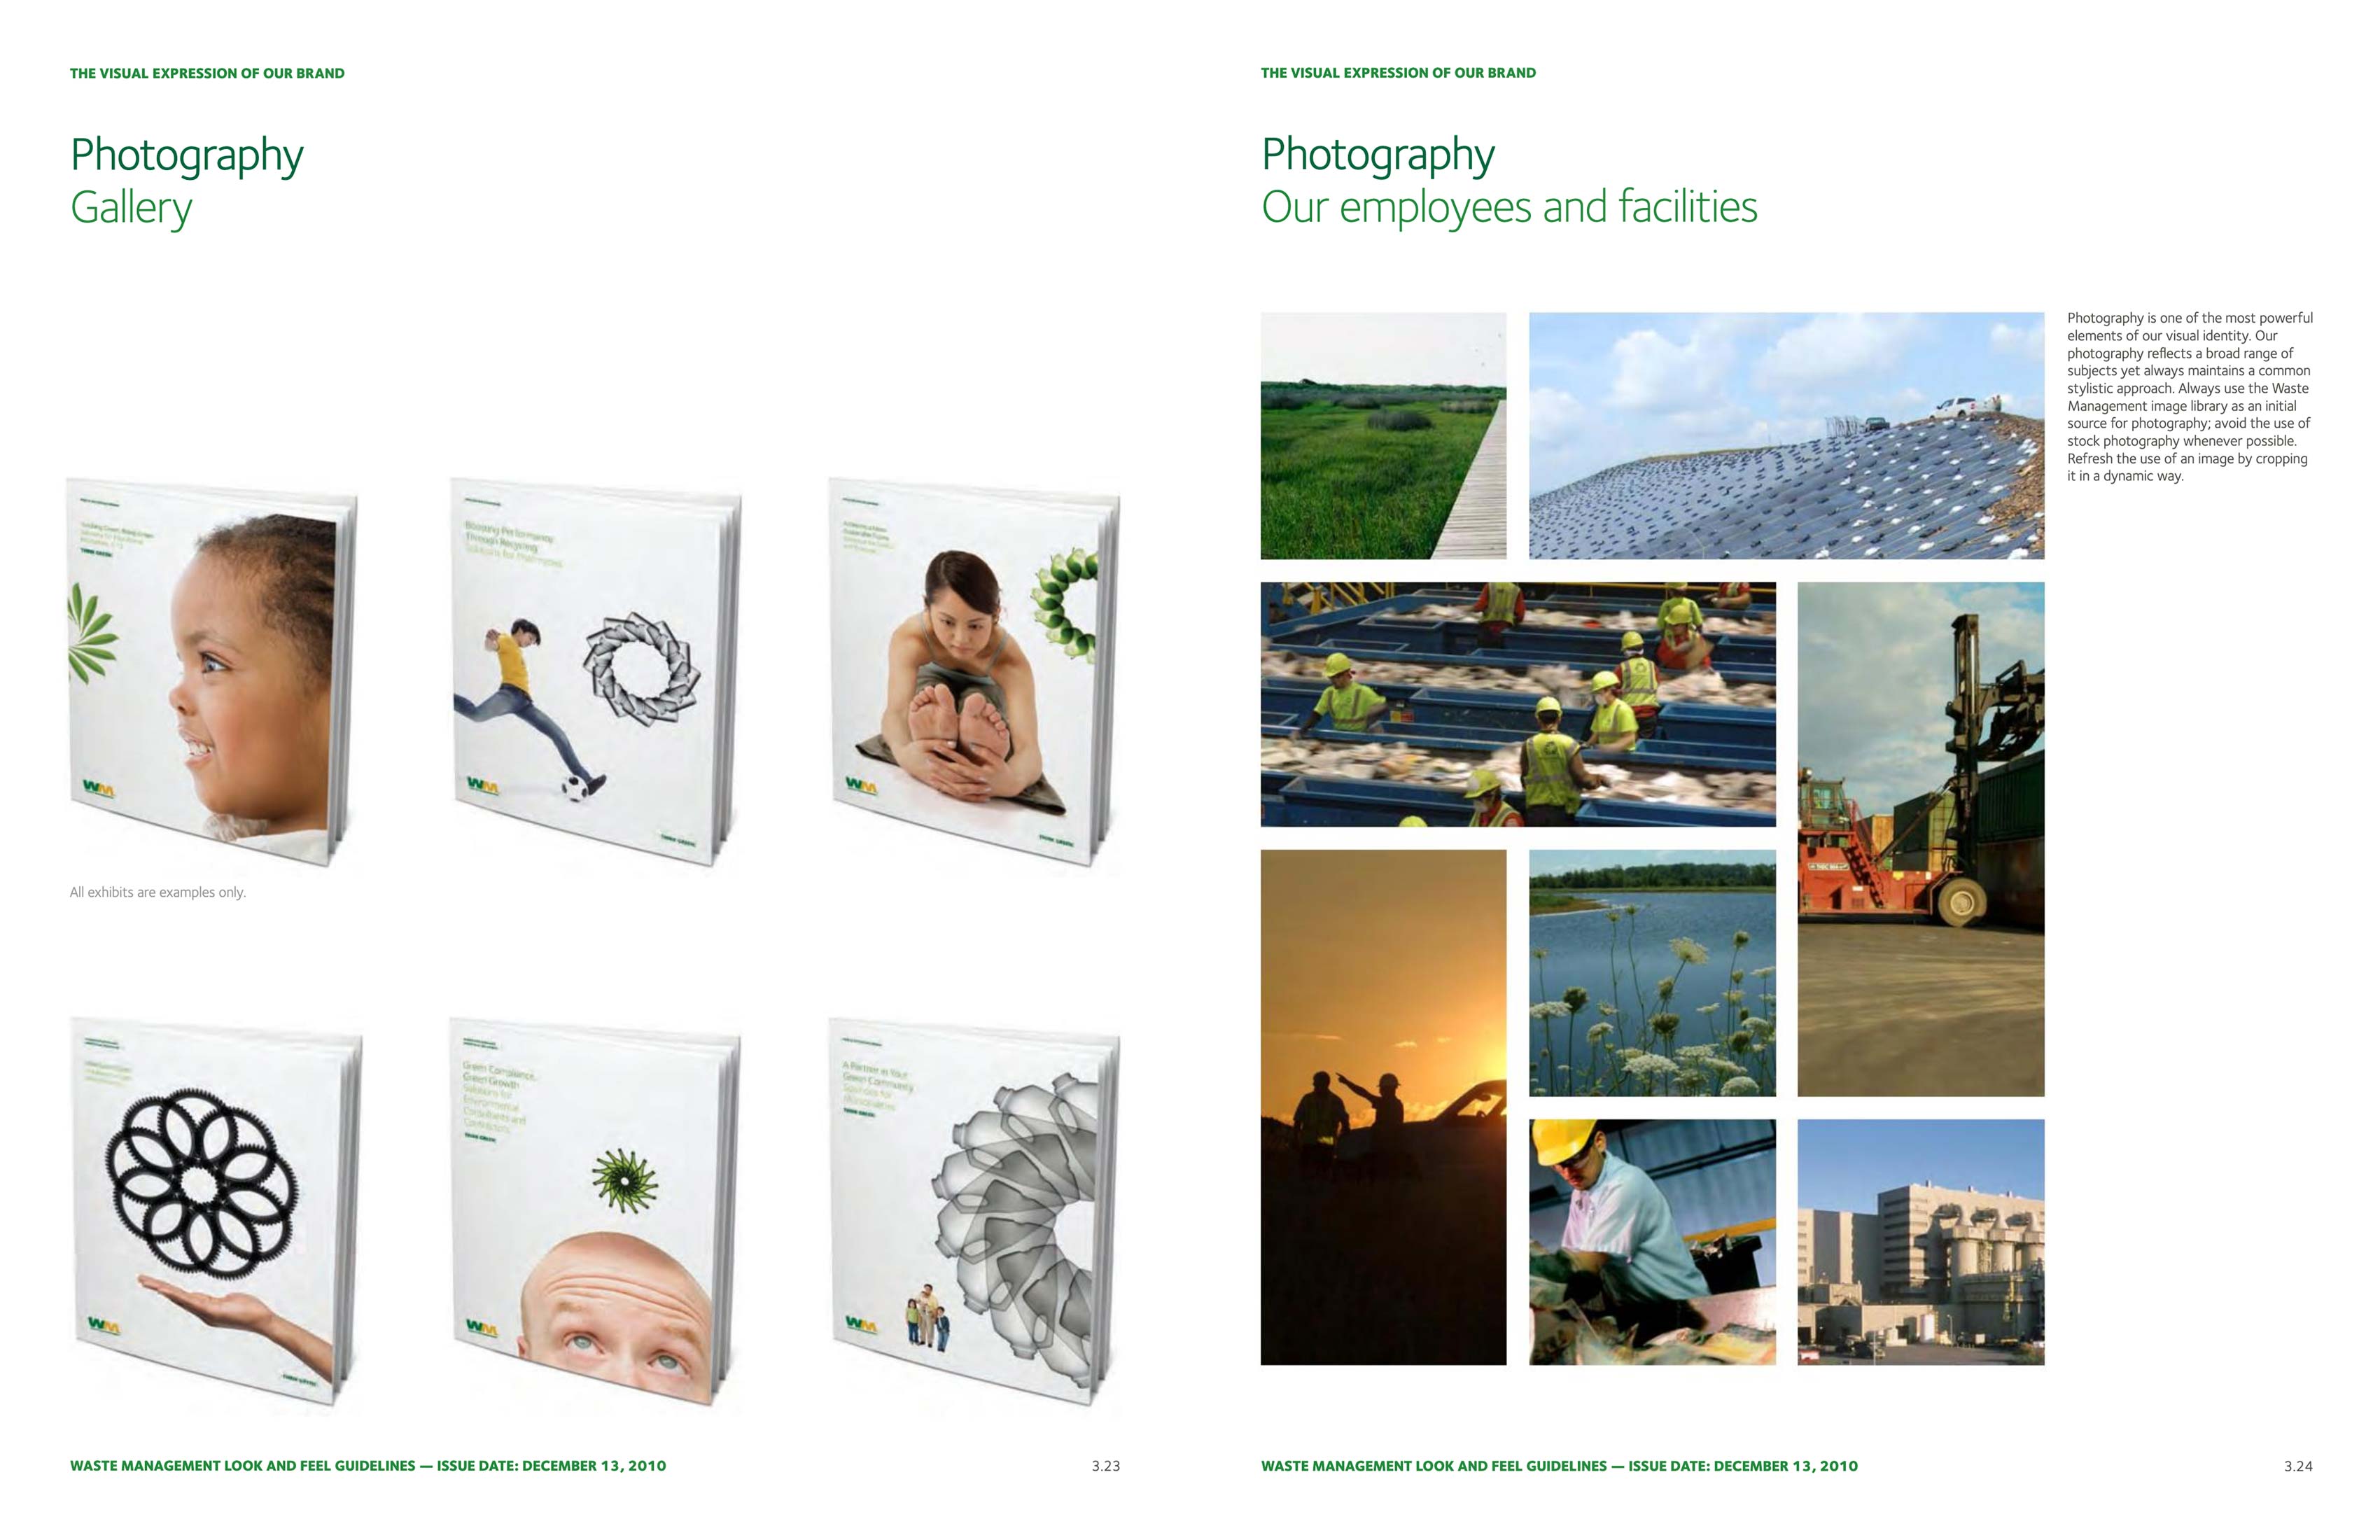 Example 1 - Waste Management Branding Guidelines